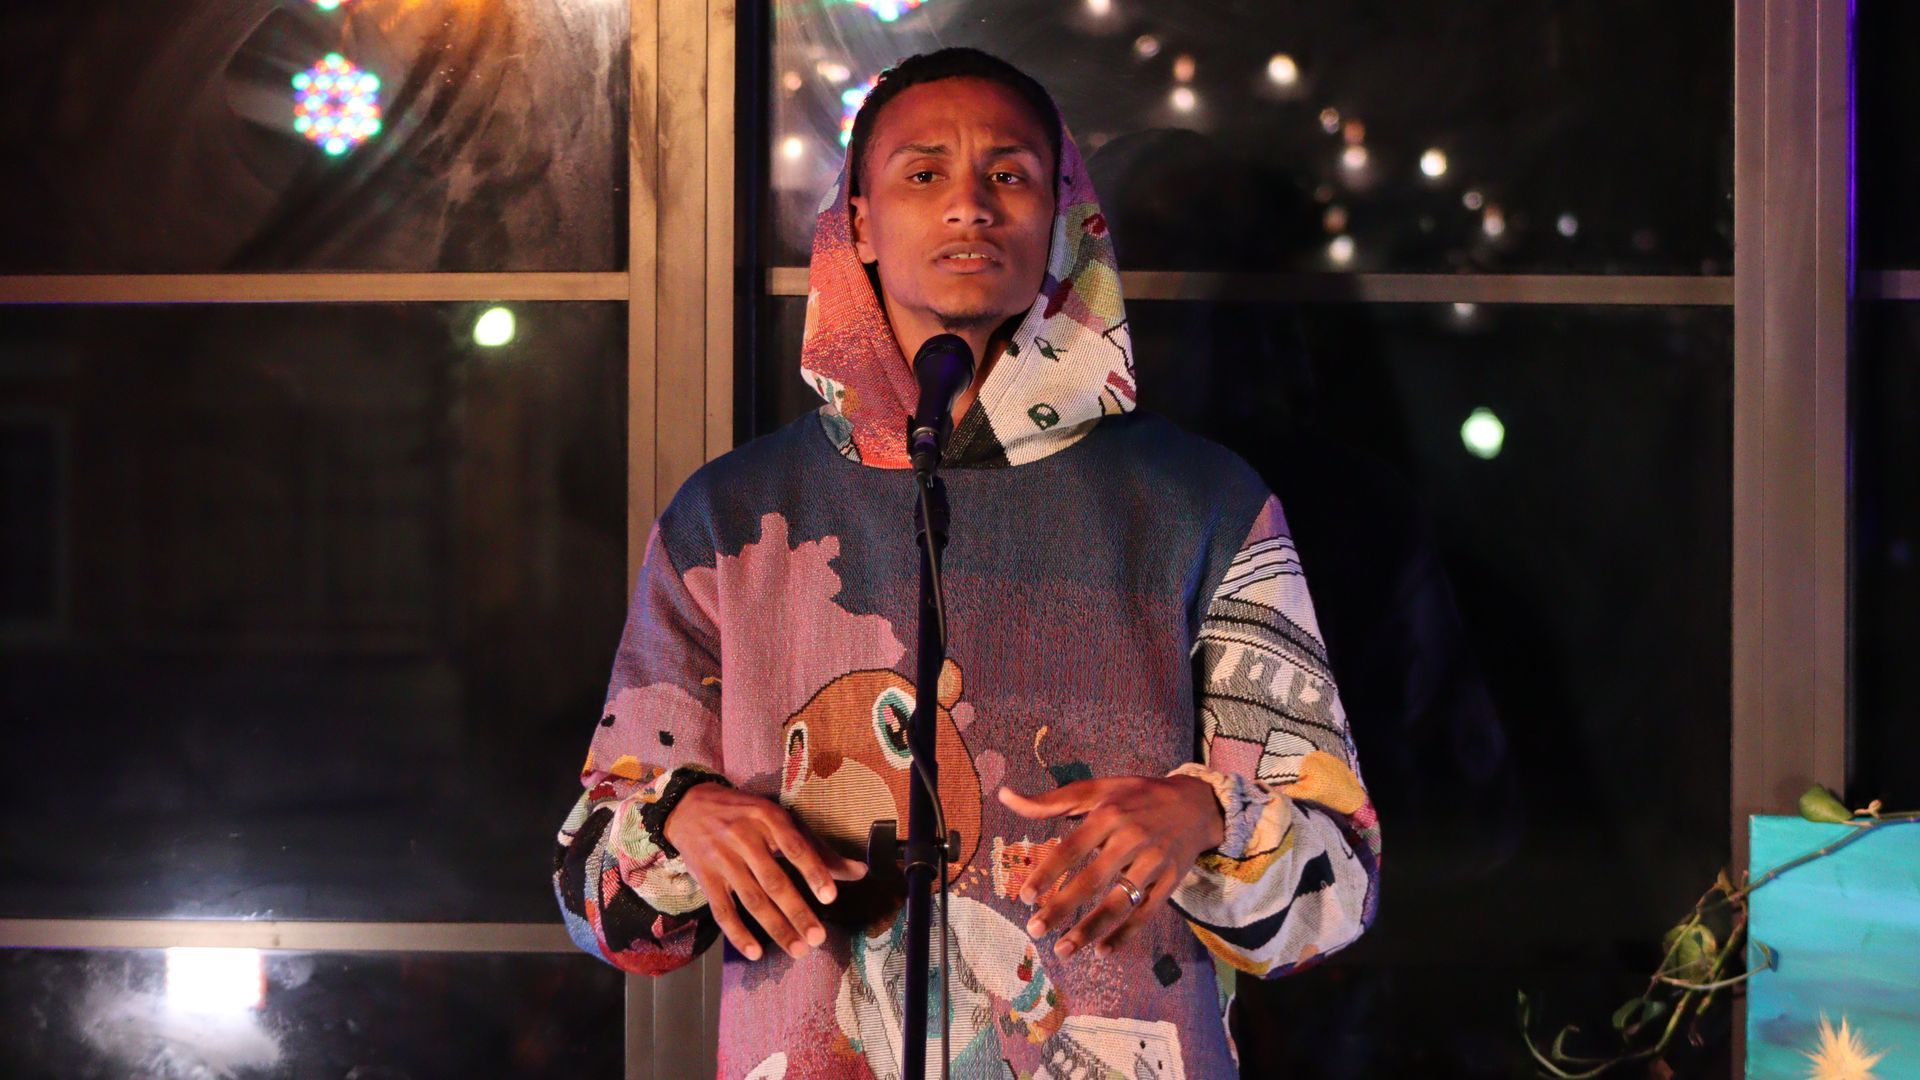 A man in a hoodie is singing into a microphone.